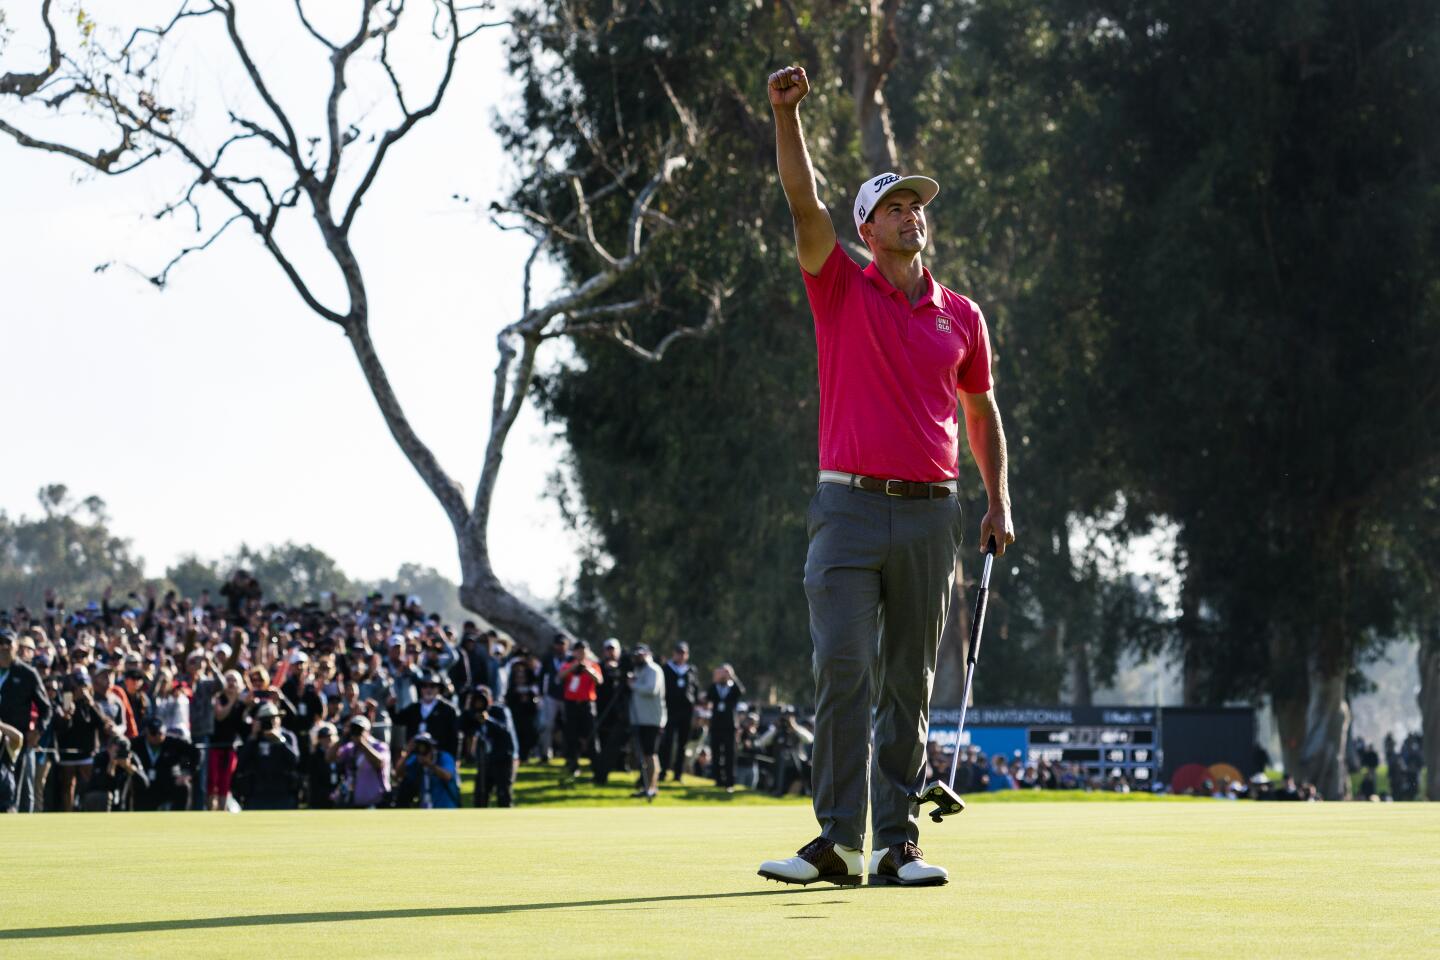 Adam Scott celebrates after winning the Genesis Invitational at Riviera Country Club in Pacific Palisades on Feb. 16, 2020.